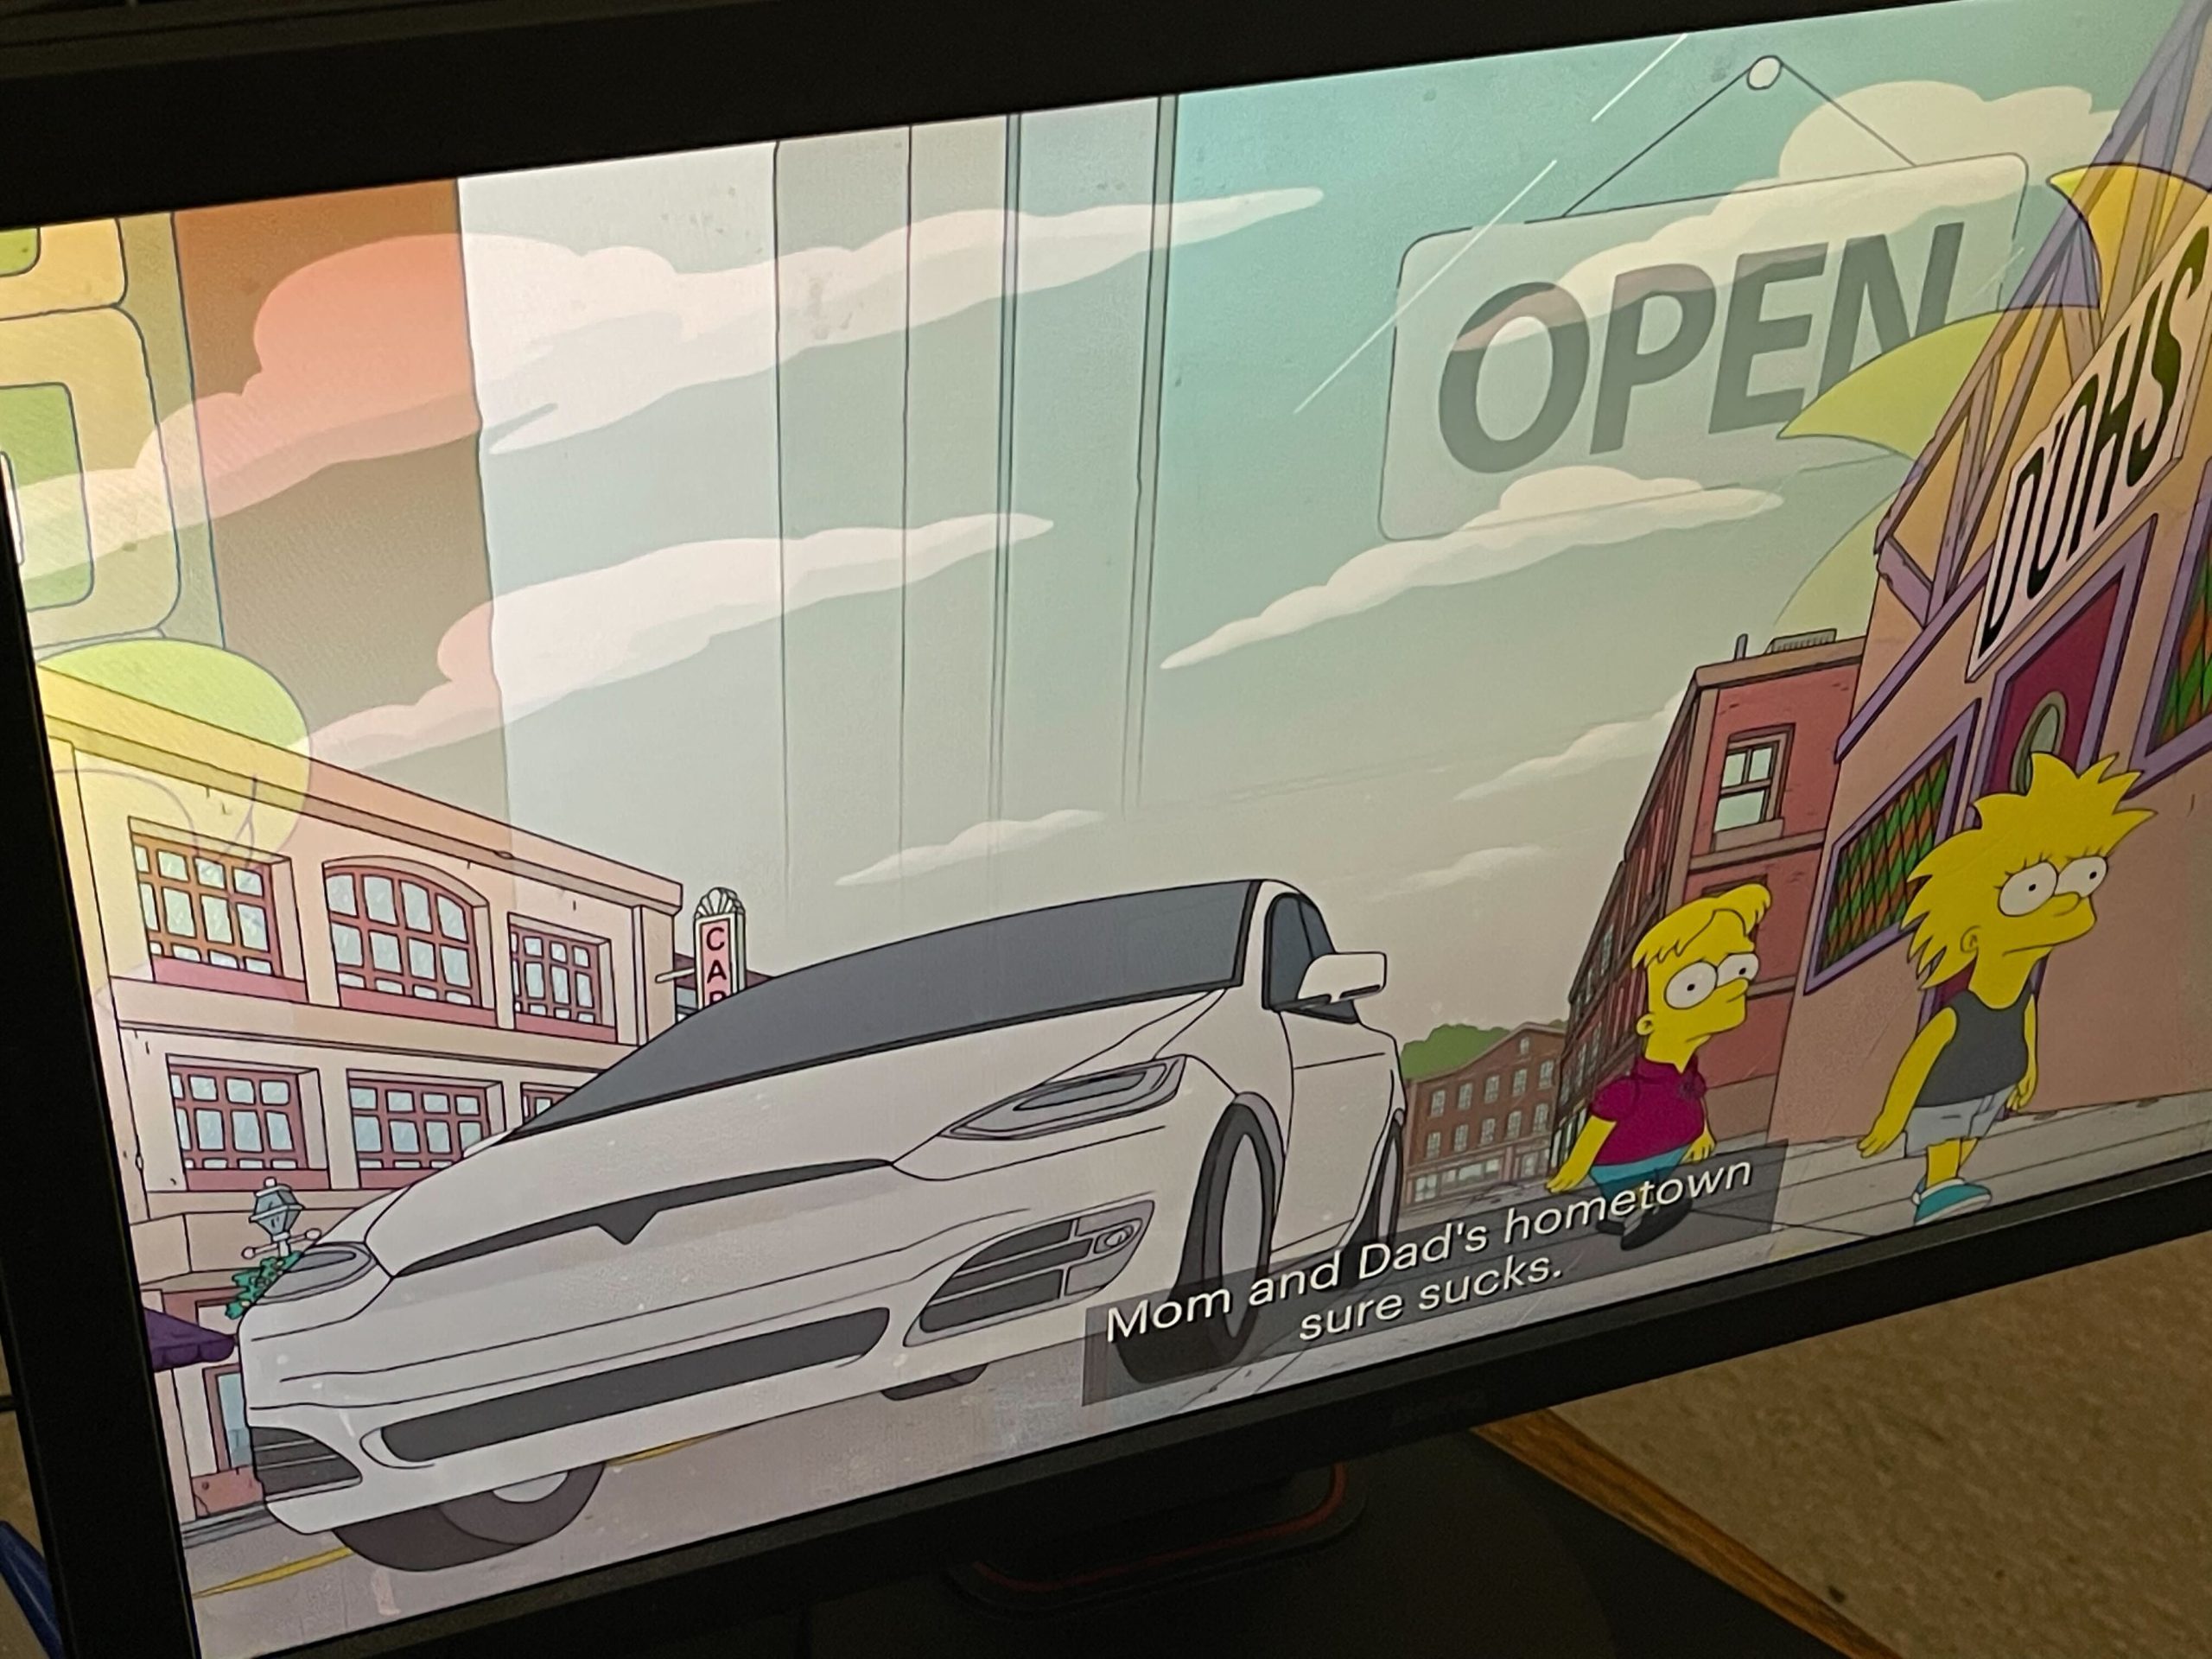 Tesla Cybertruck & Model X make cameo appearances in Halloween episodes of The Simpsons